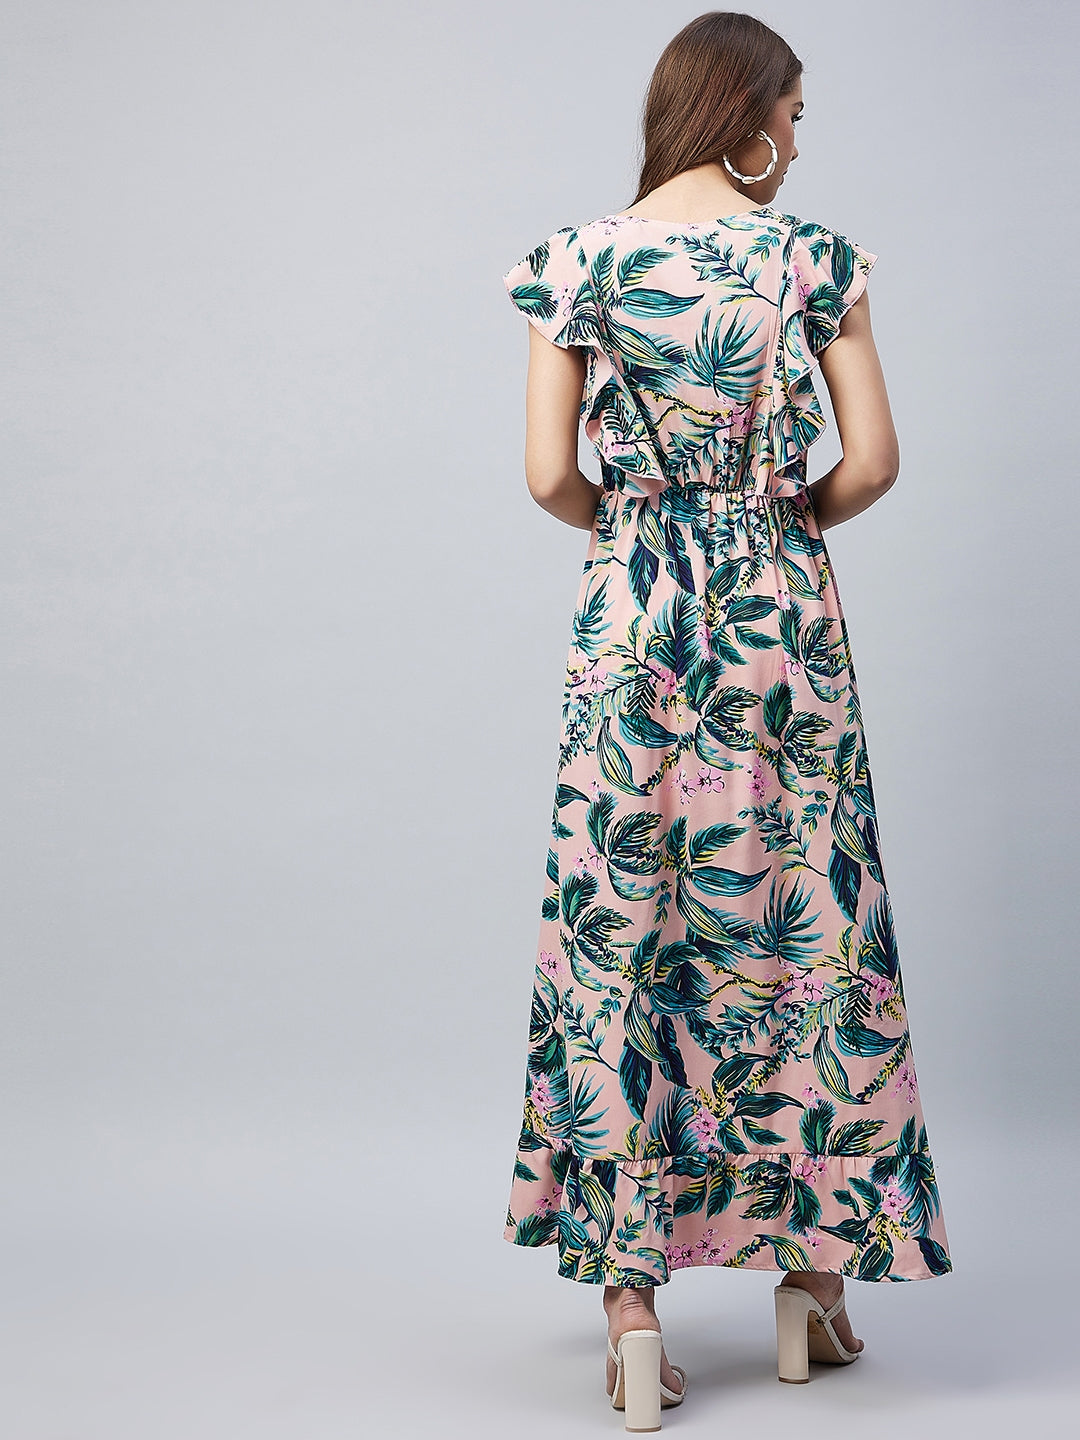 Women's Multicolour Floral Maxi Dress with Flutter Sleeves